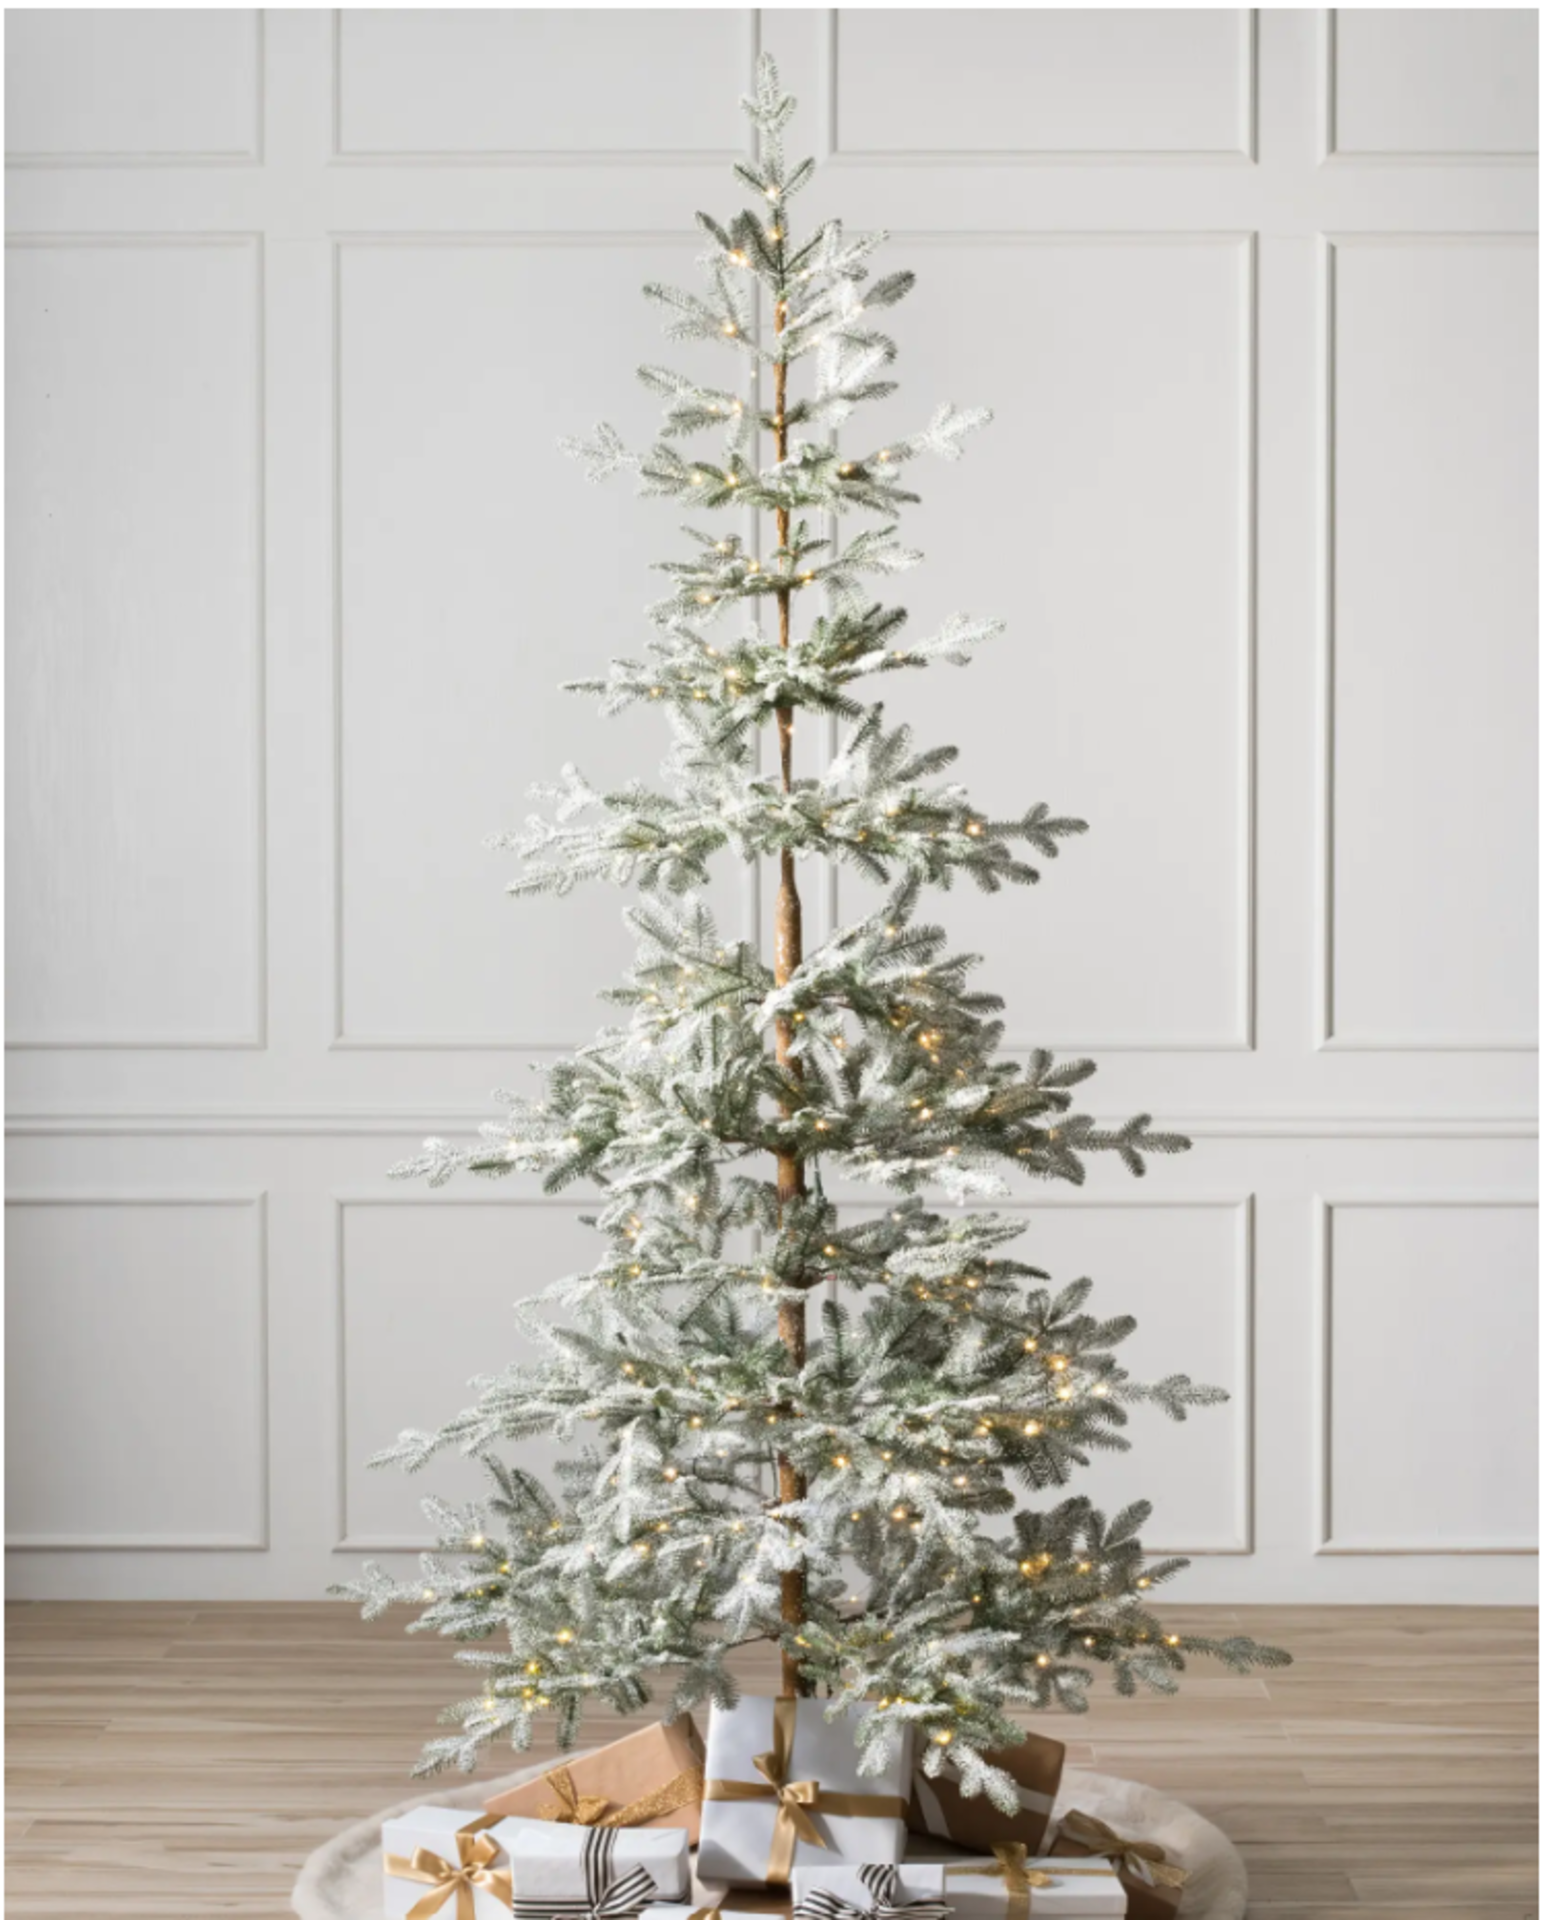 BH (The worlds leading Christmas Trees) Frosted Alpine Balsam Fir, Unlit. RRP £459.00. Add the